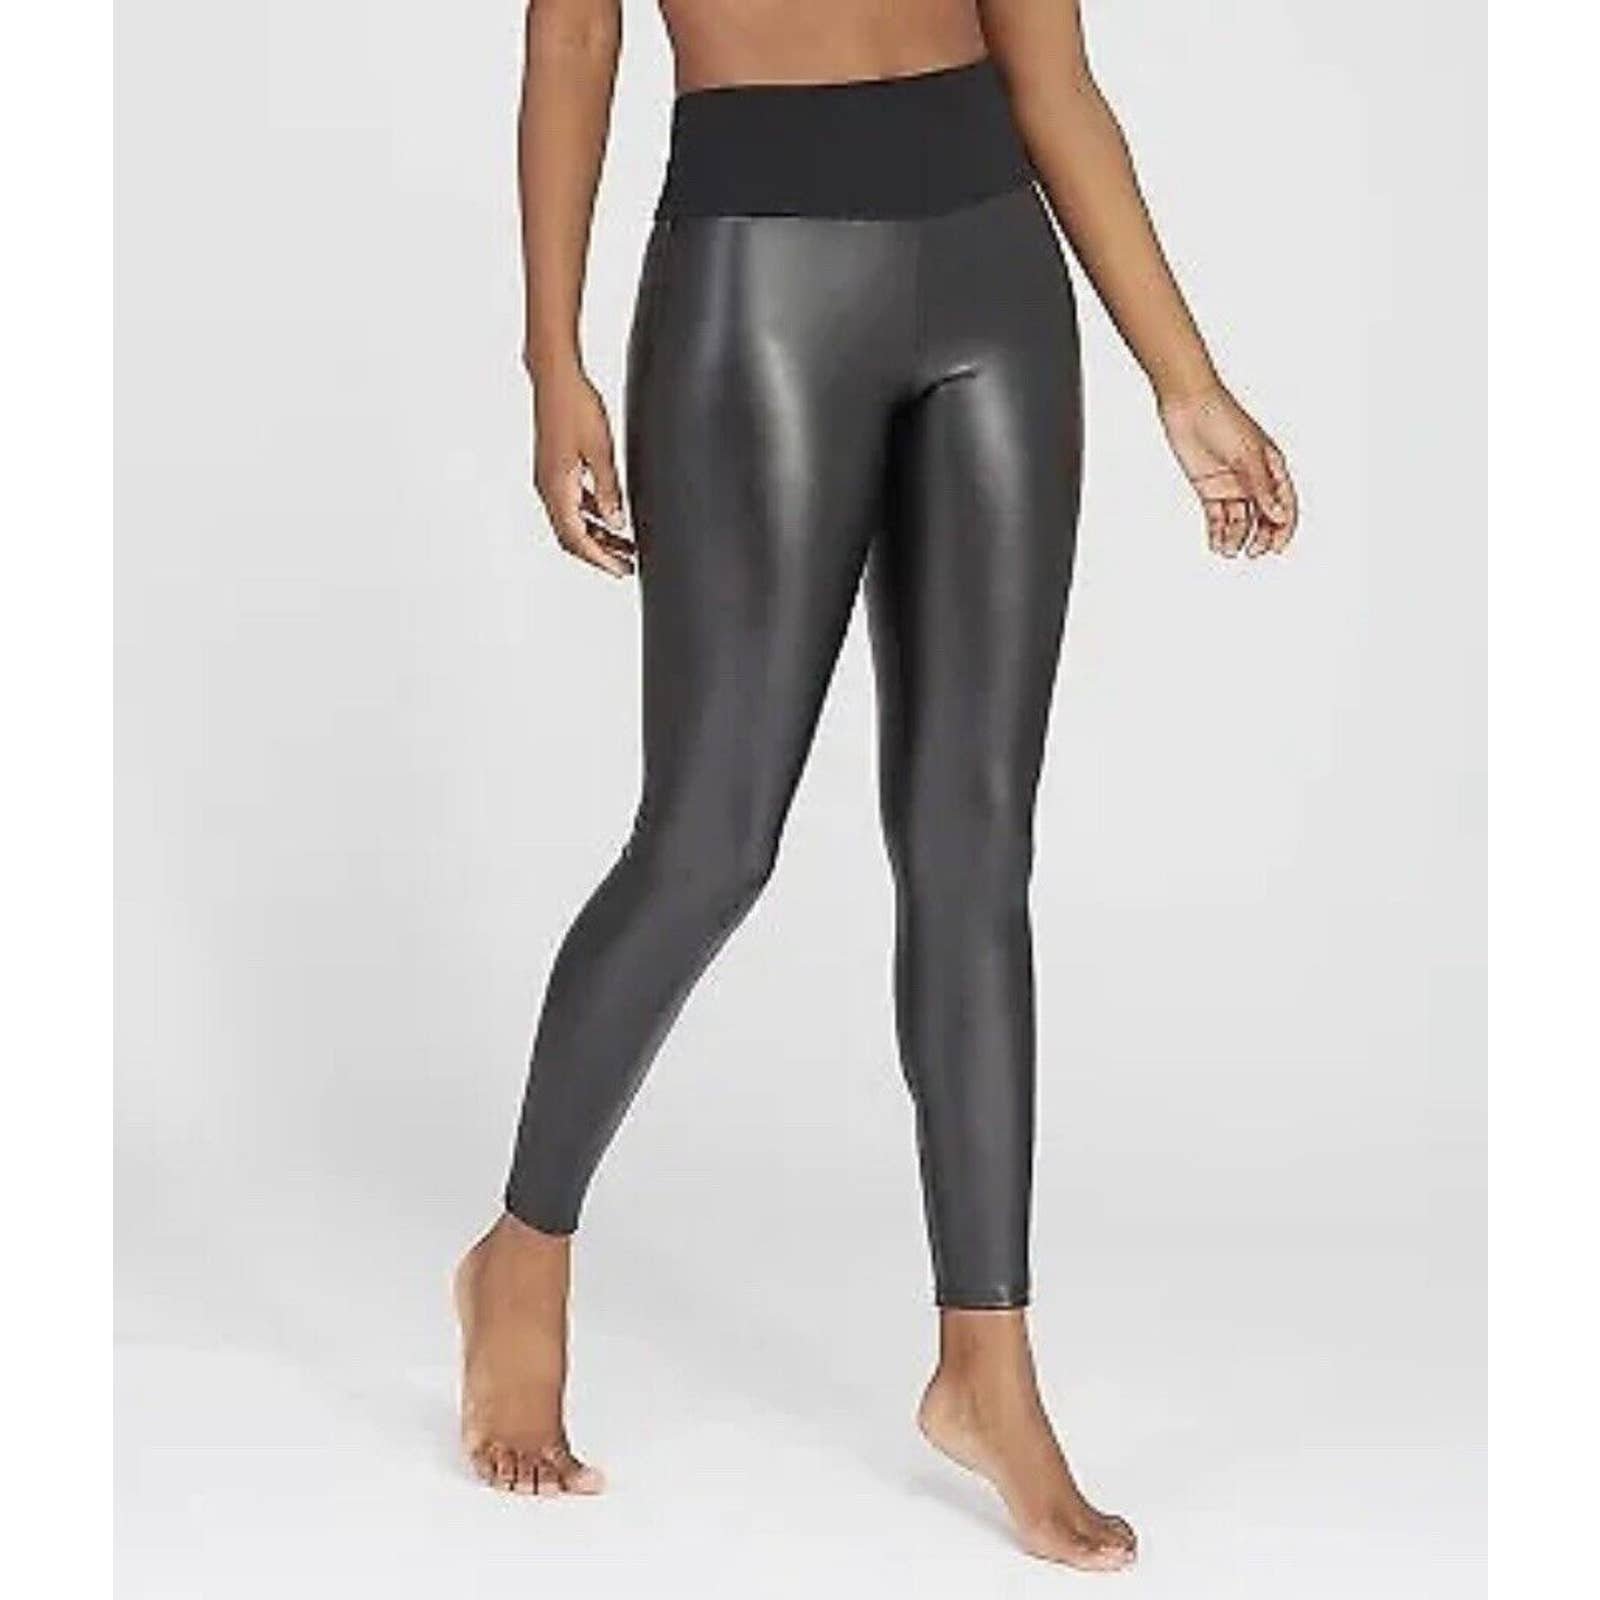 high discount SPANX Assets All Over Faux Leather Leggings 20258R Very Black Size small PMFjnSv5h well sale